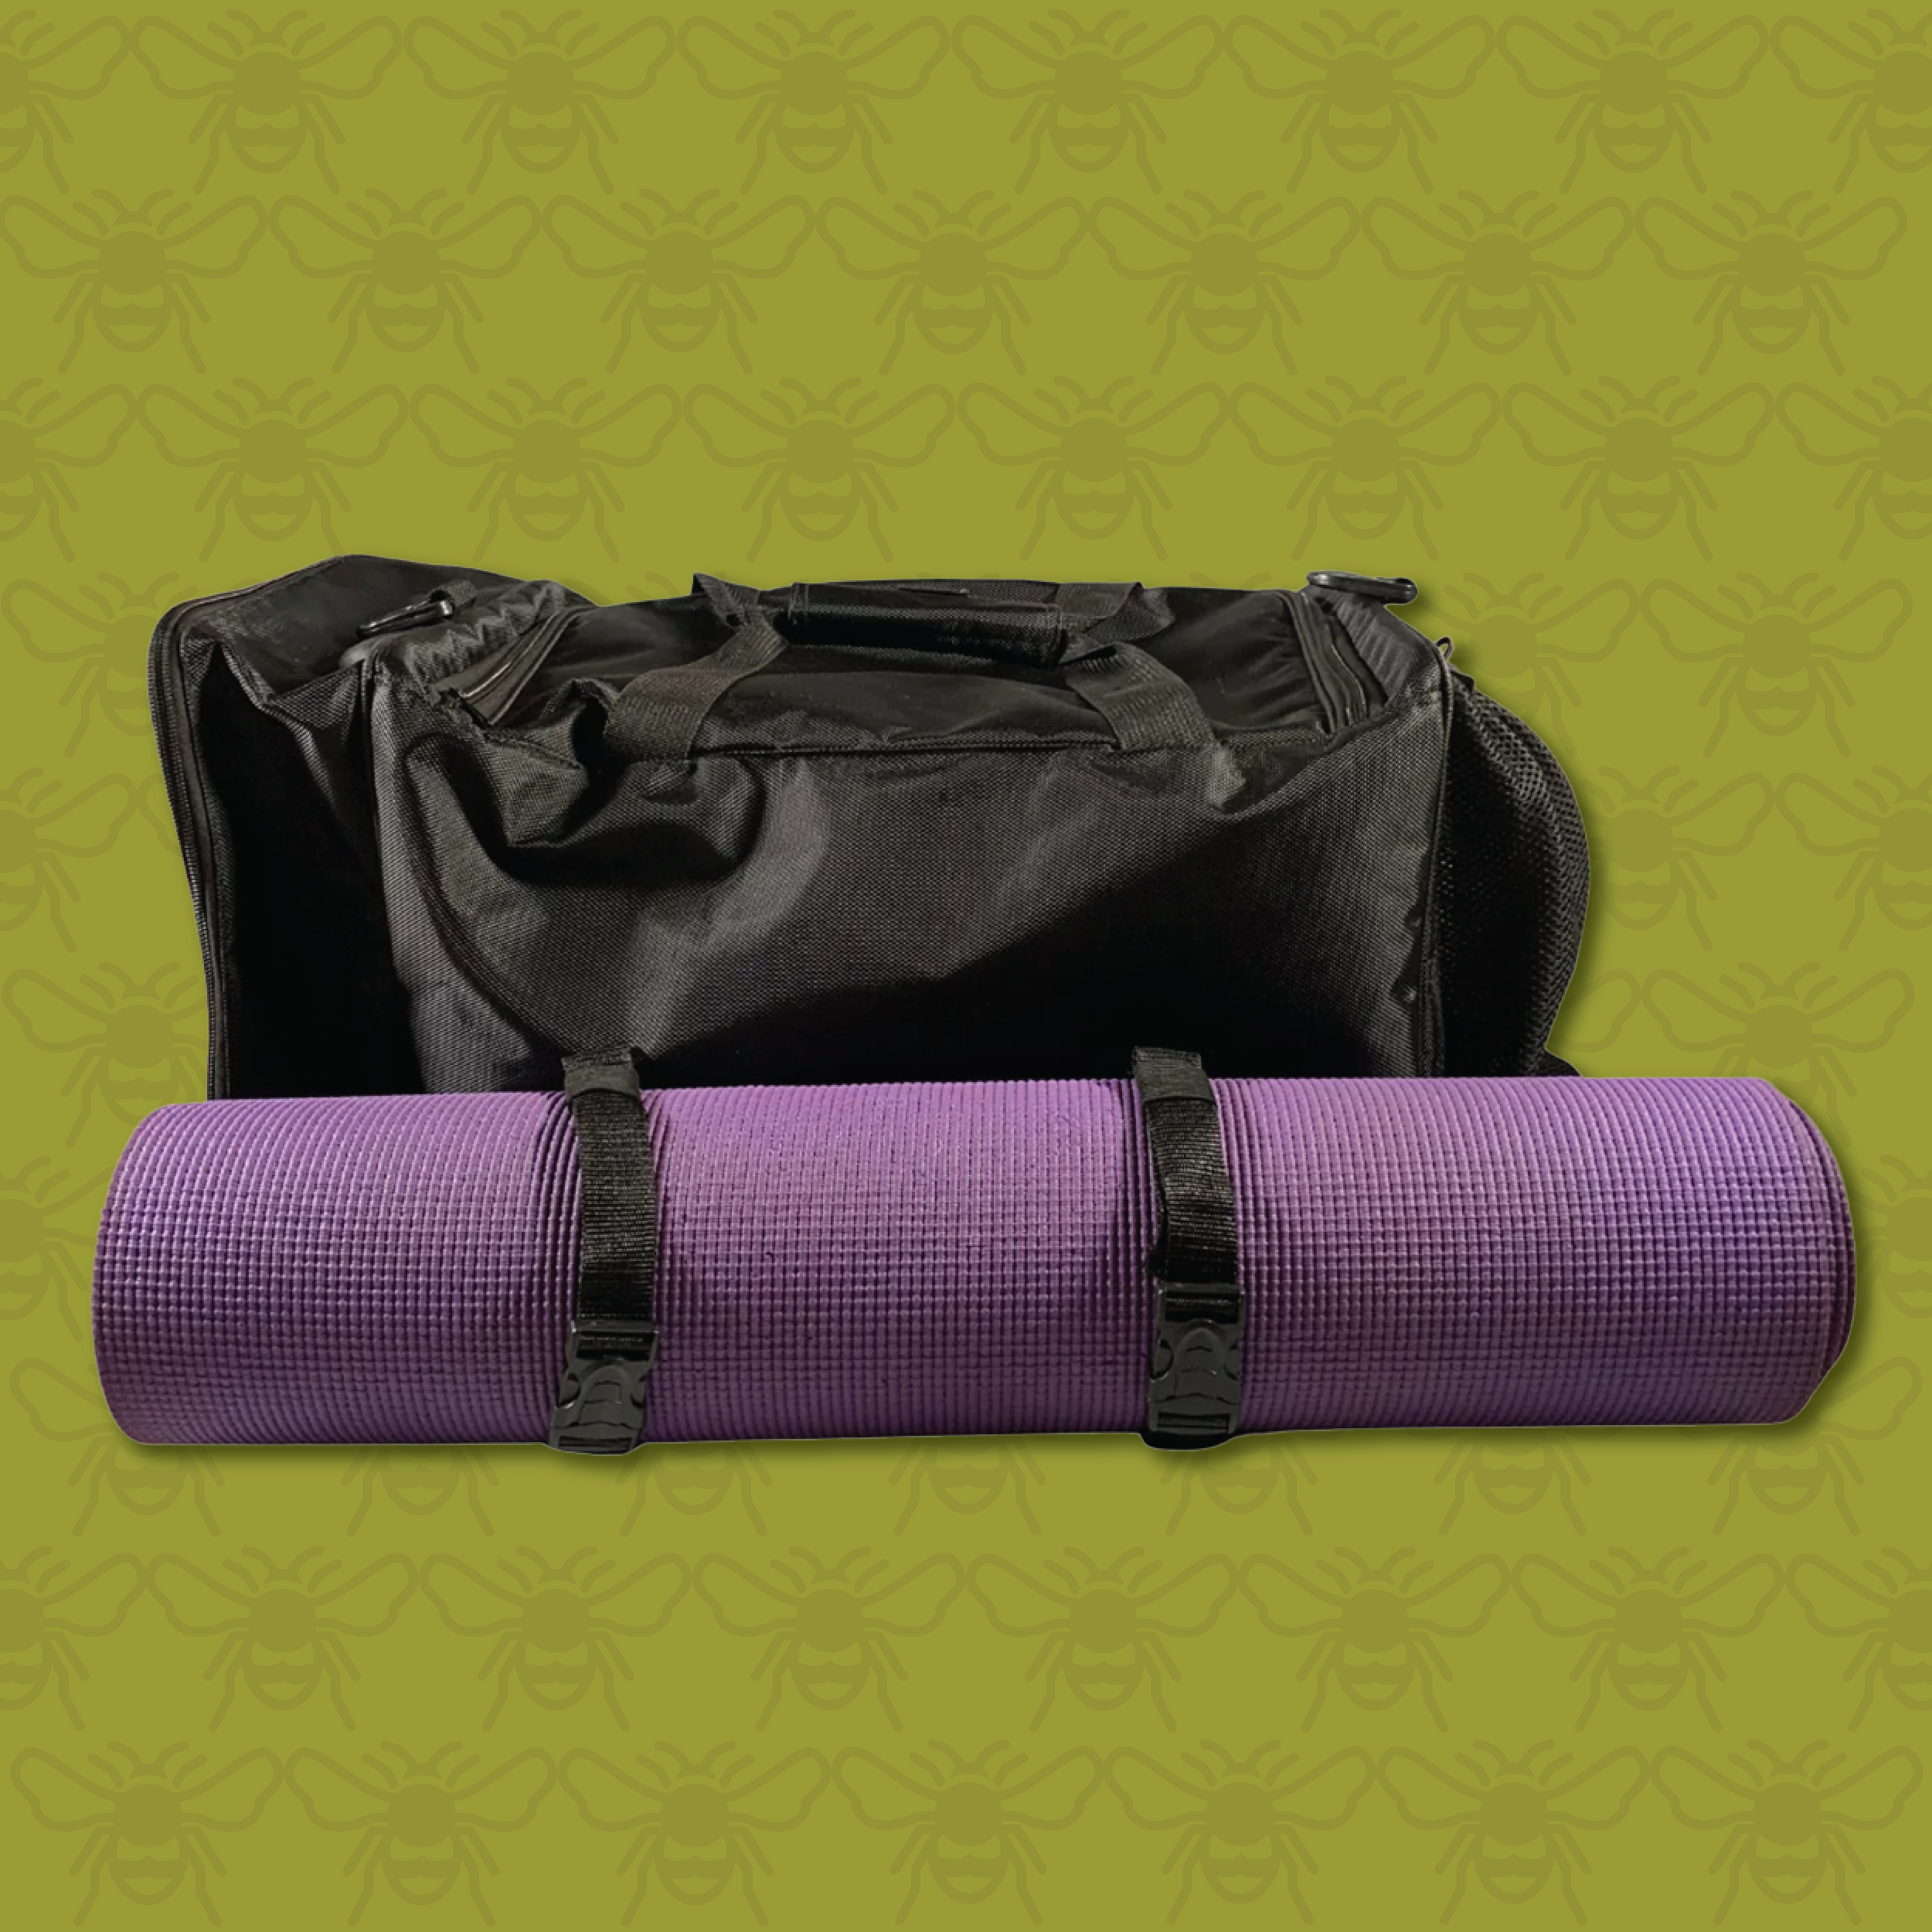 Yoga Mat Bag, Best YOGA BAG TOTE, This Yoga Mat Carrier is Made of